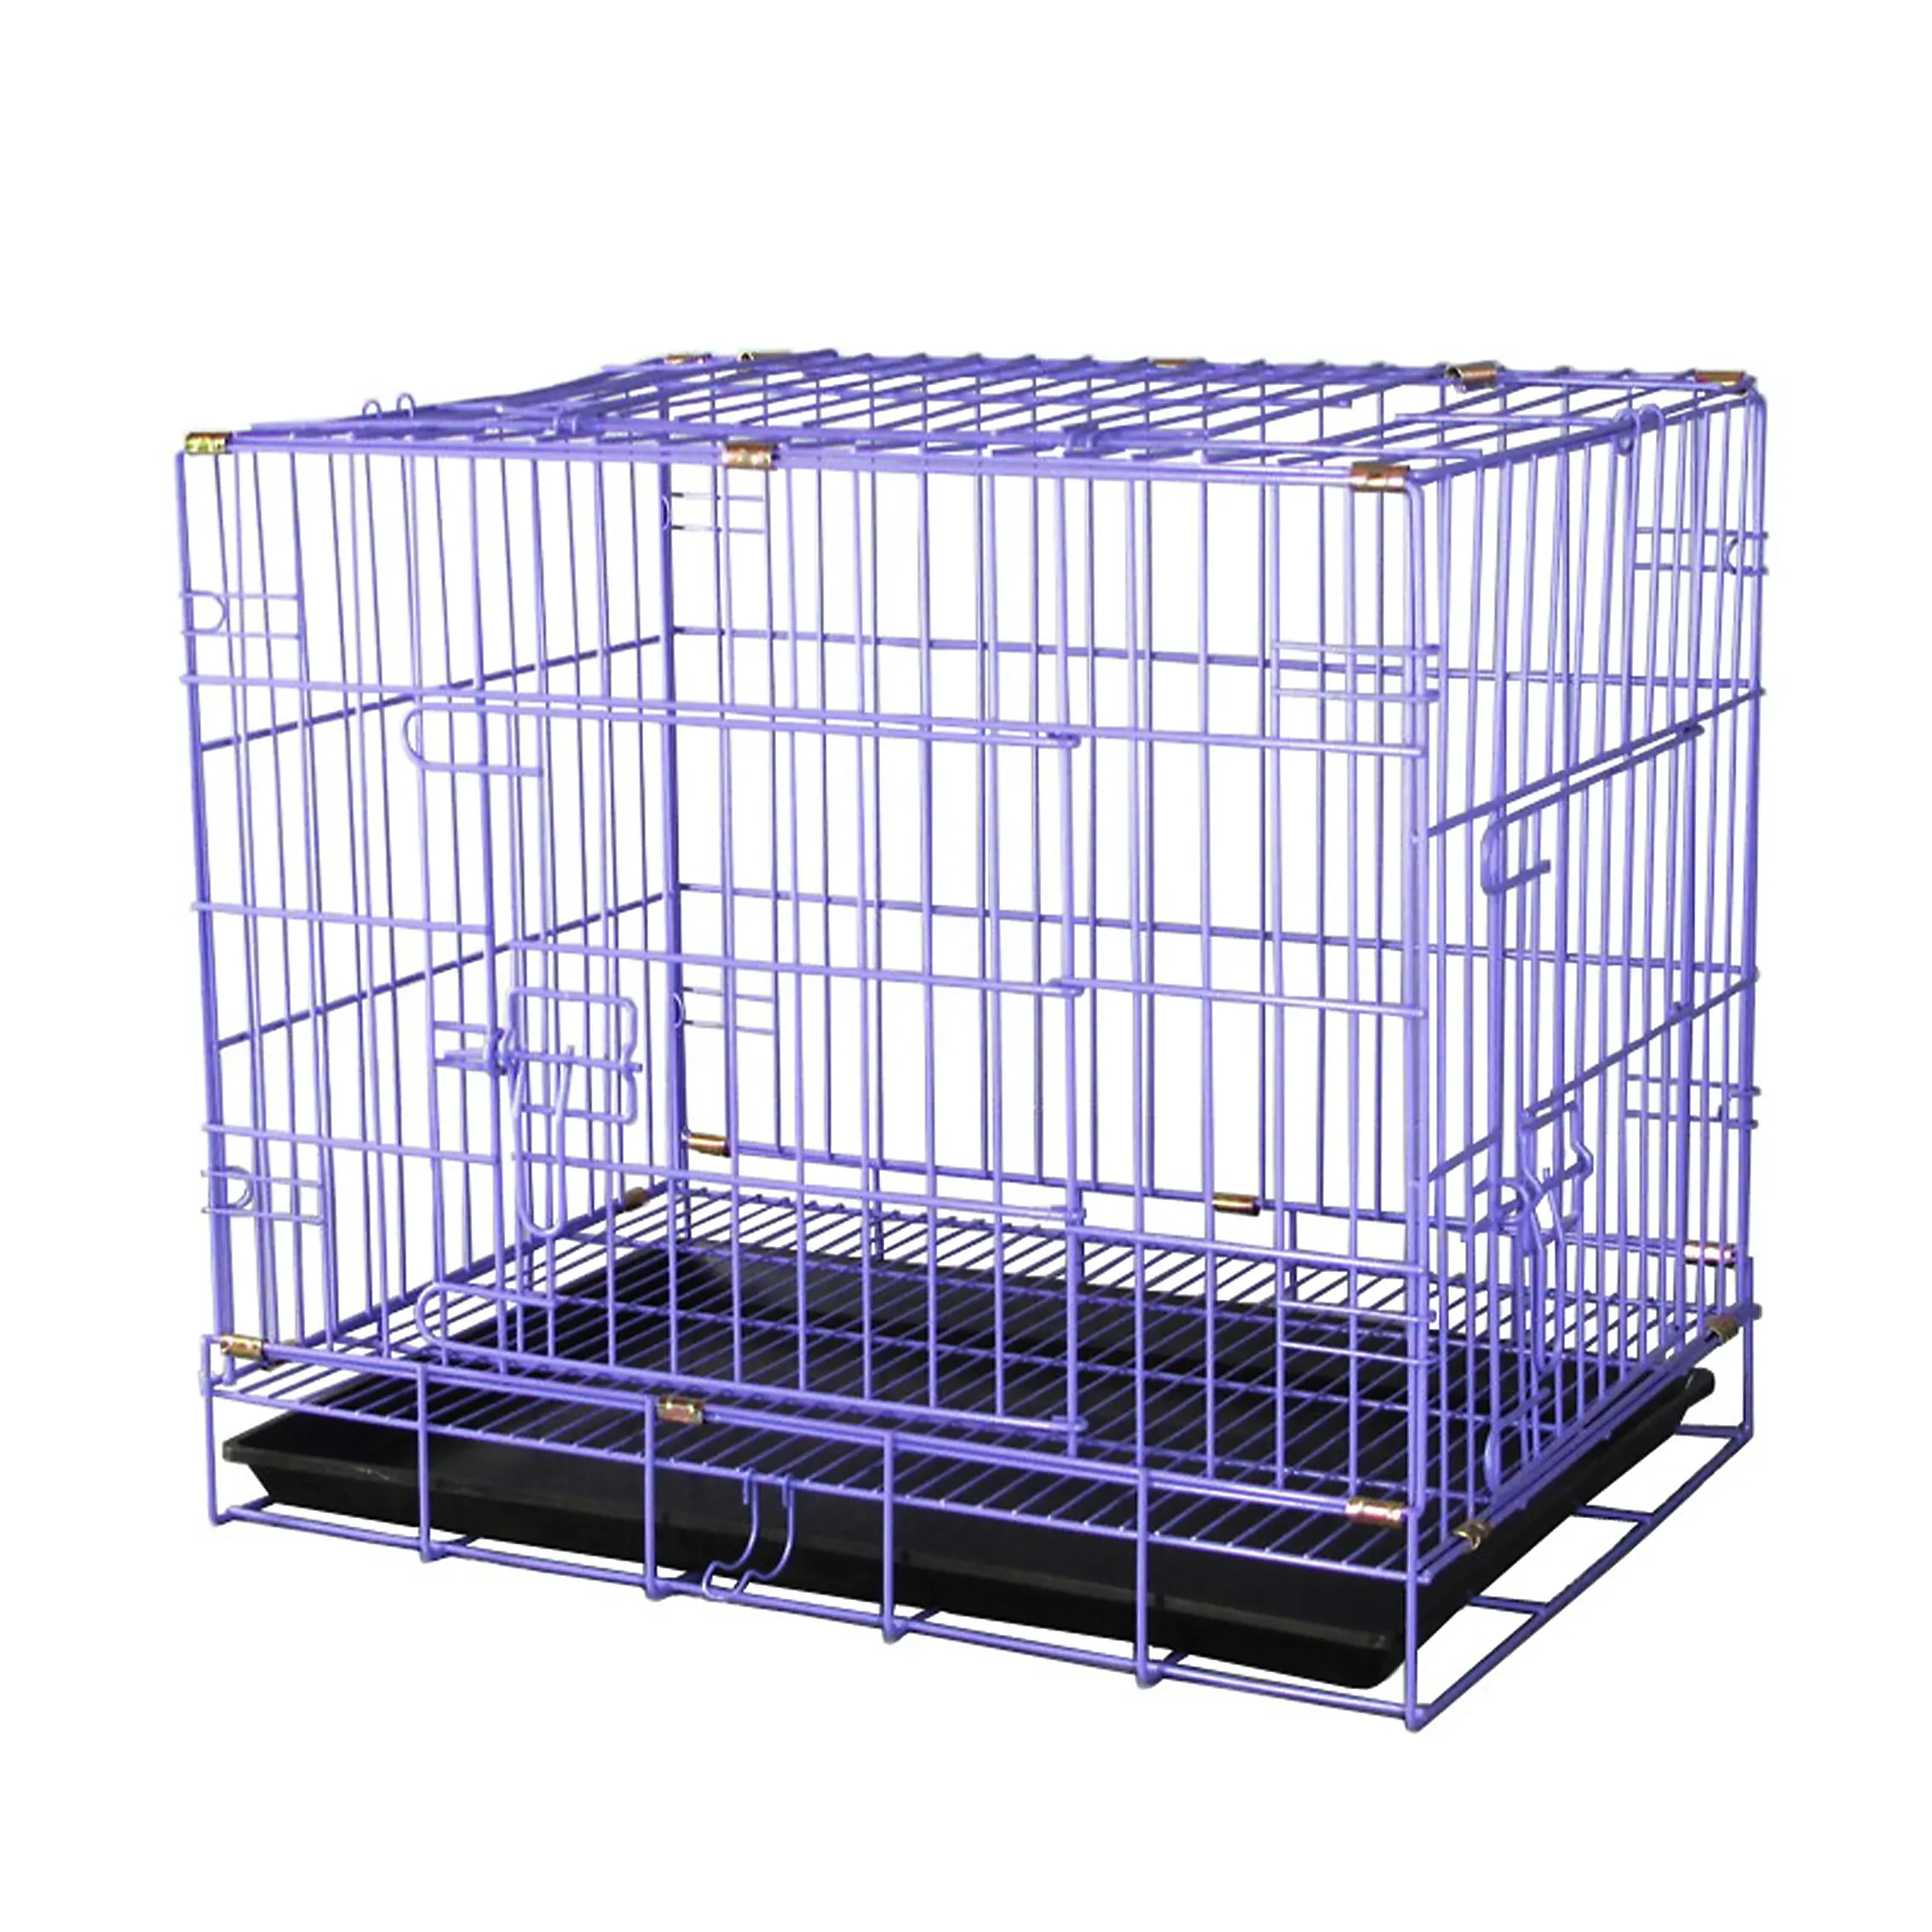 High Quality Stainless Steel Pet Cages Dog Kennel Outdoor Used Large Dog Cages Metal Kennels